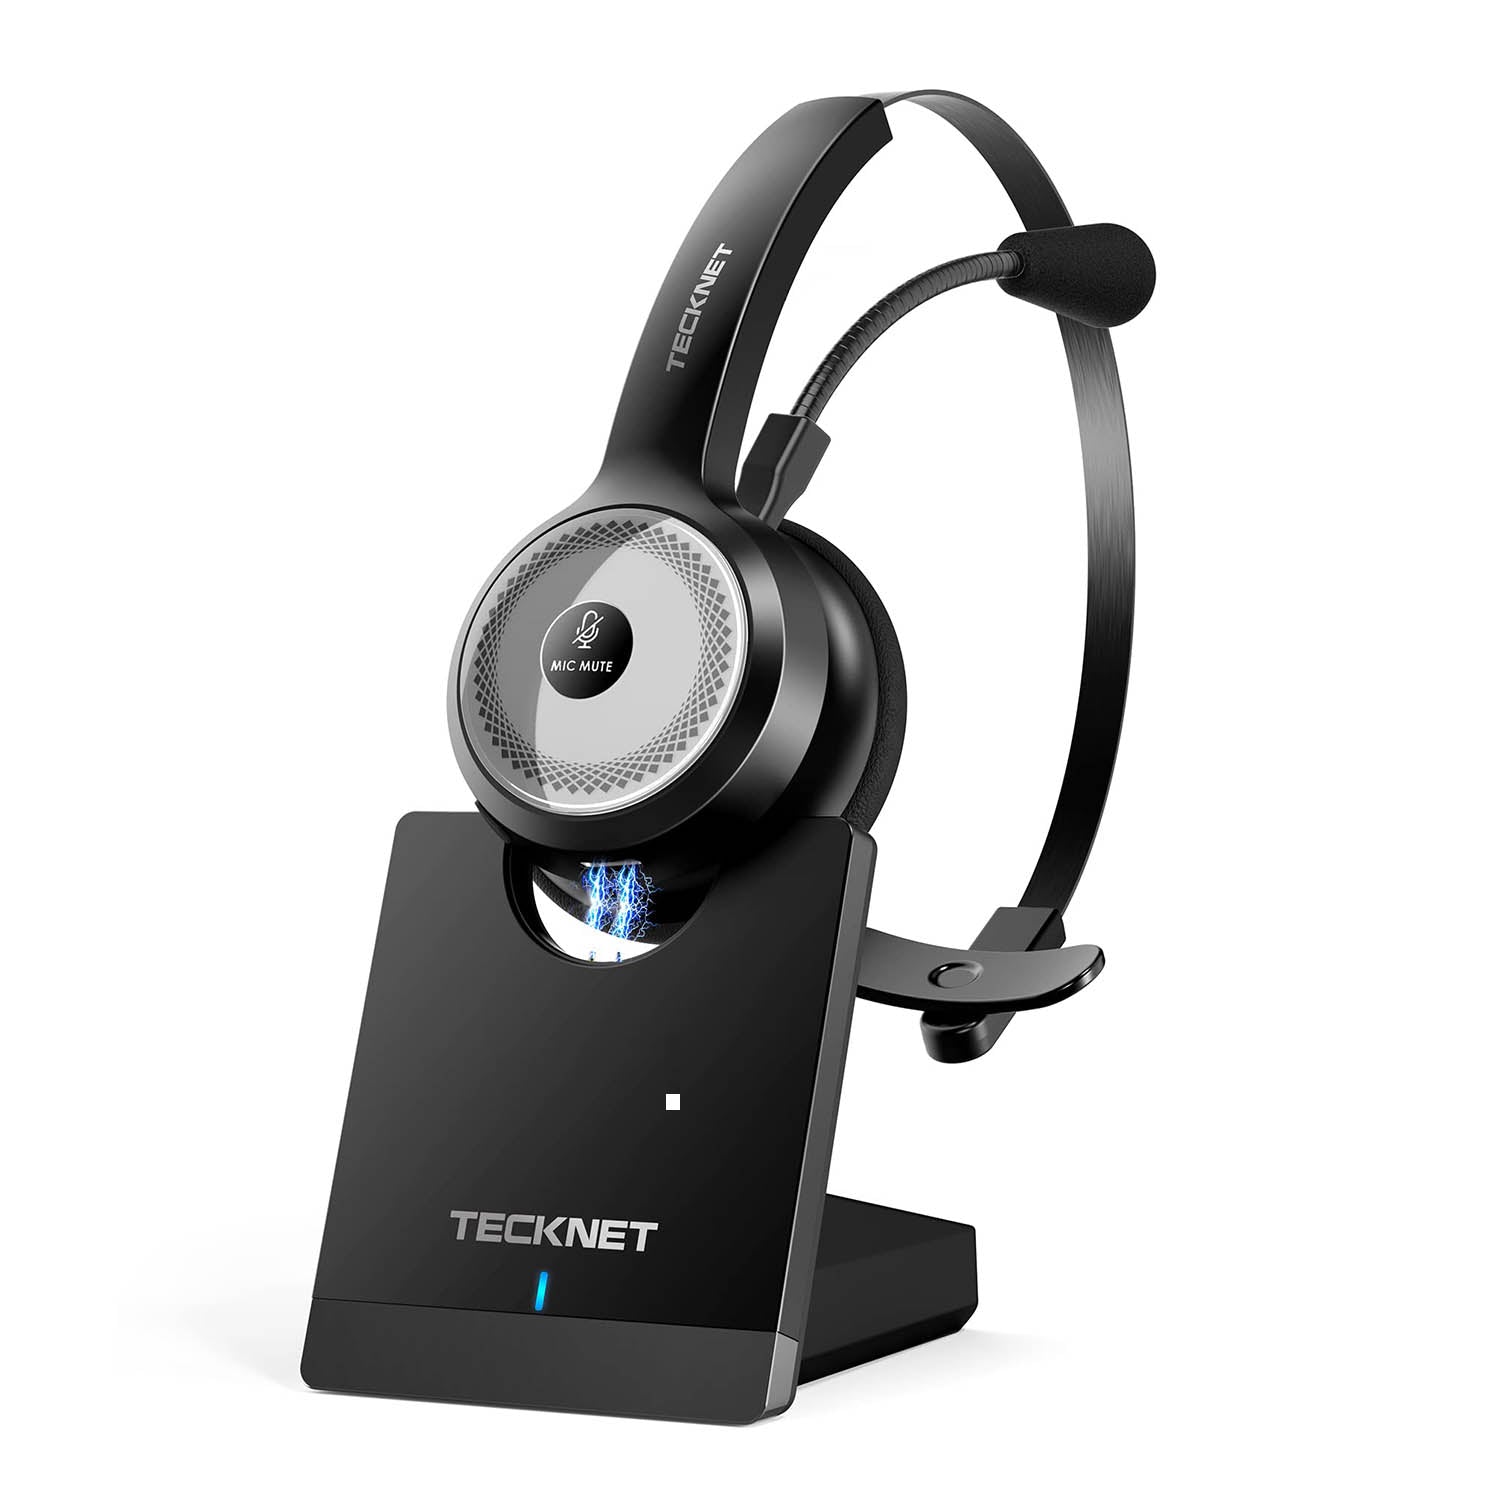  Sarevile Bluetooth Headset, Bluetooth Trucker Headset with  Upgraded Microphone Noise Canceling for Trucker, Hand Free Wireless Headset  with Adapter for Office Meeting. (Black) : Electronics